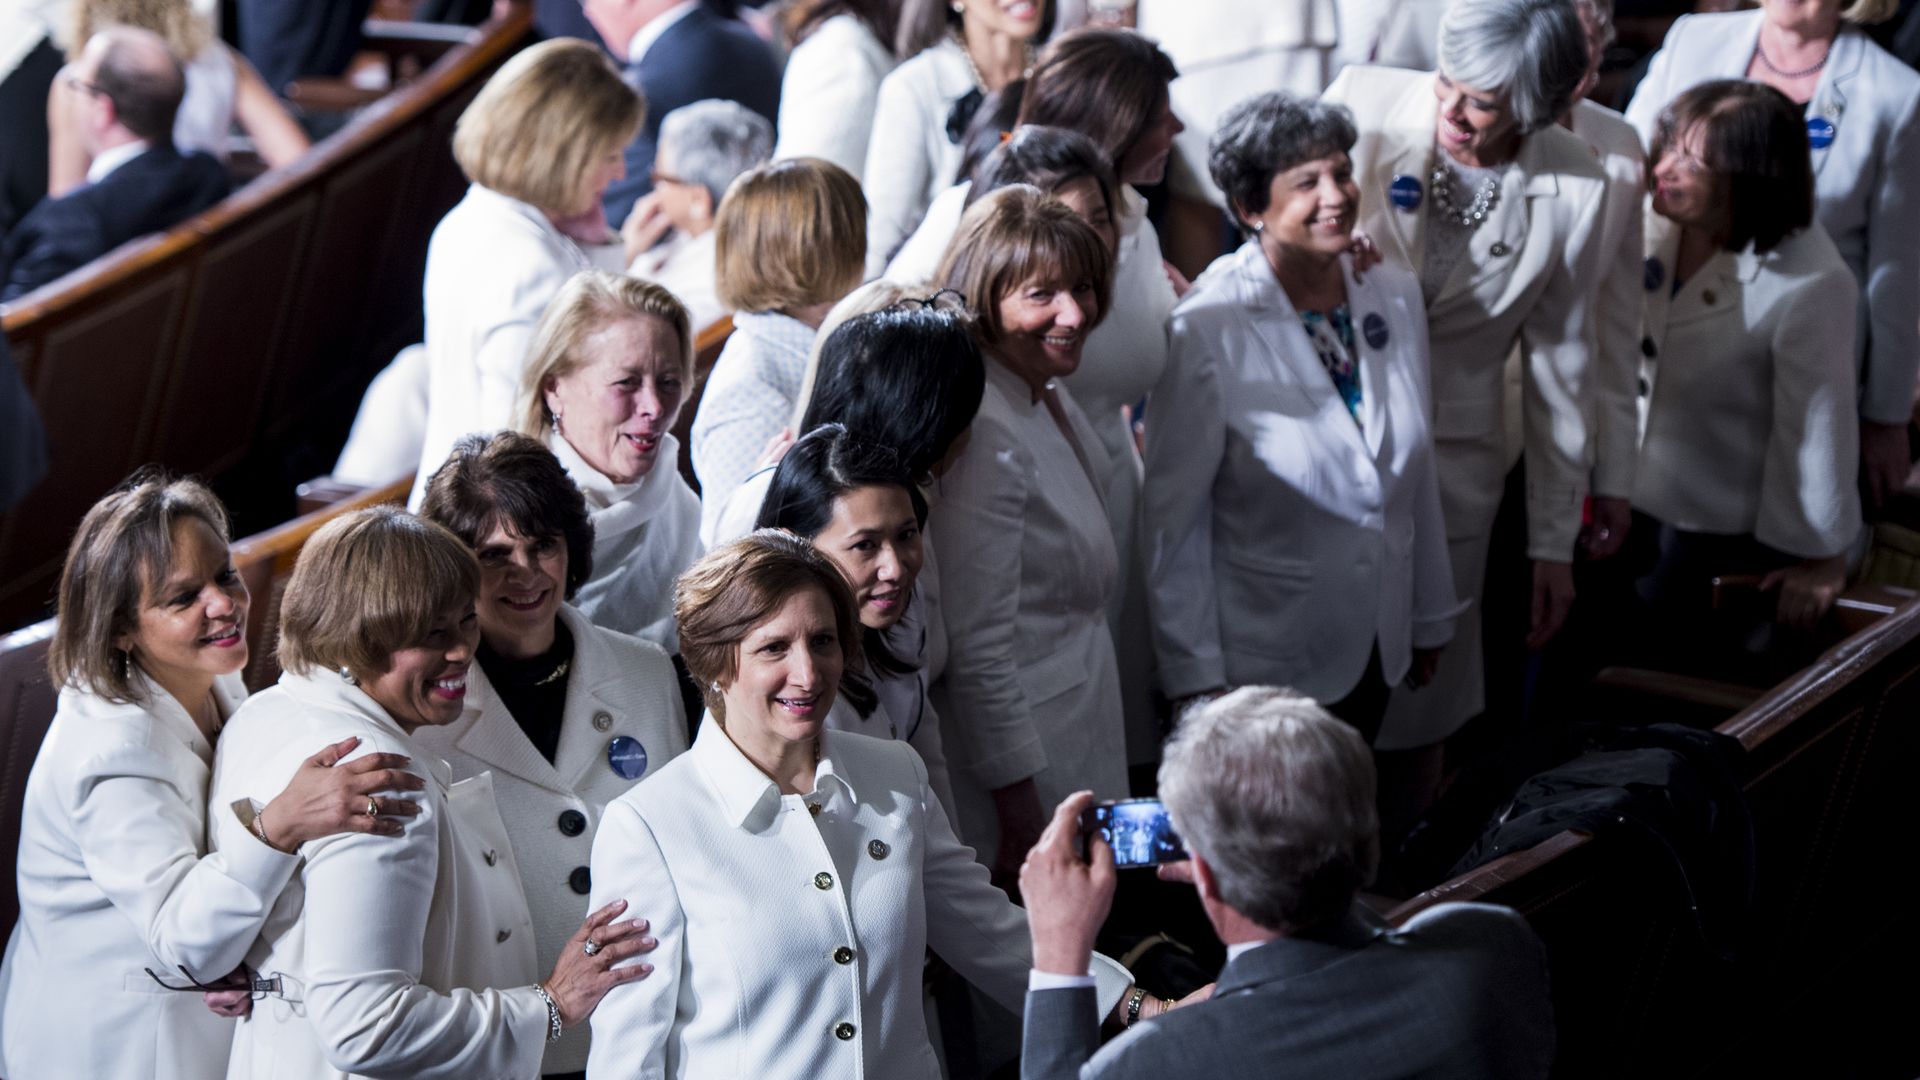 Group of Democratic women get their photo taken at President Trump's address to Congress.